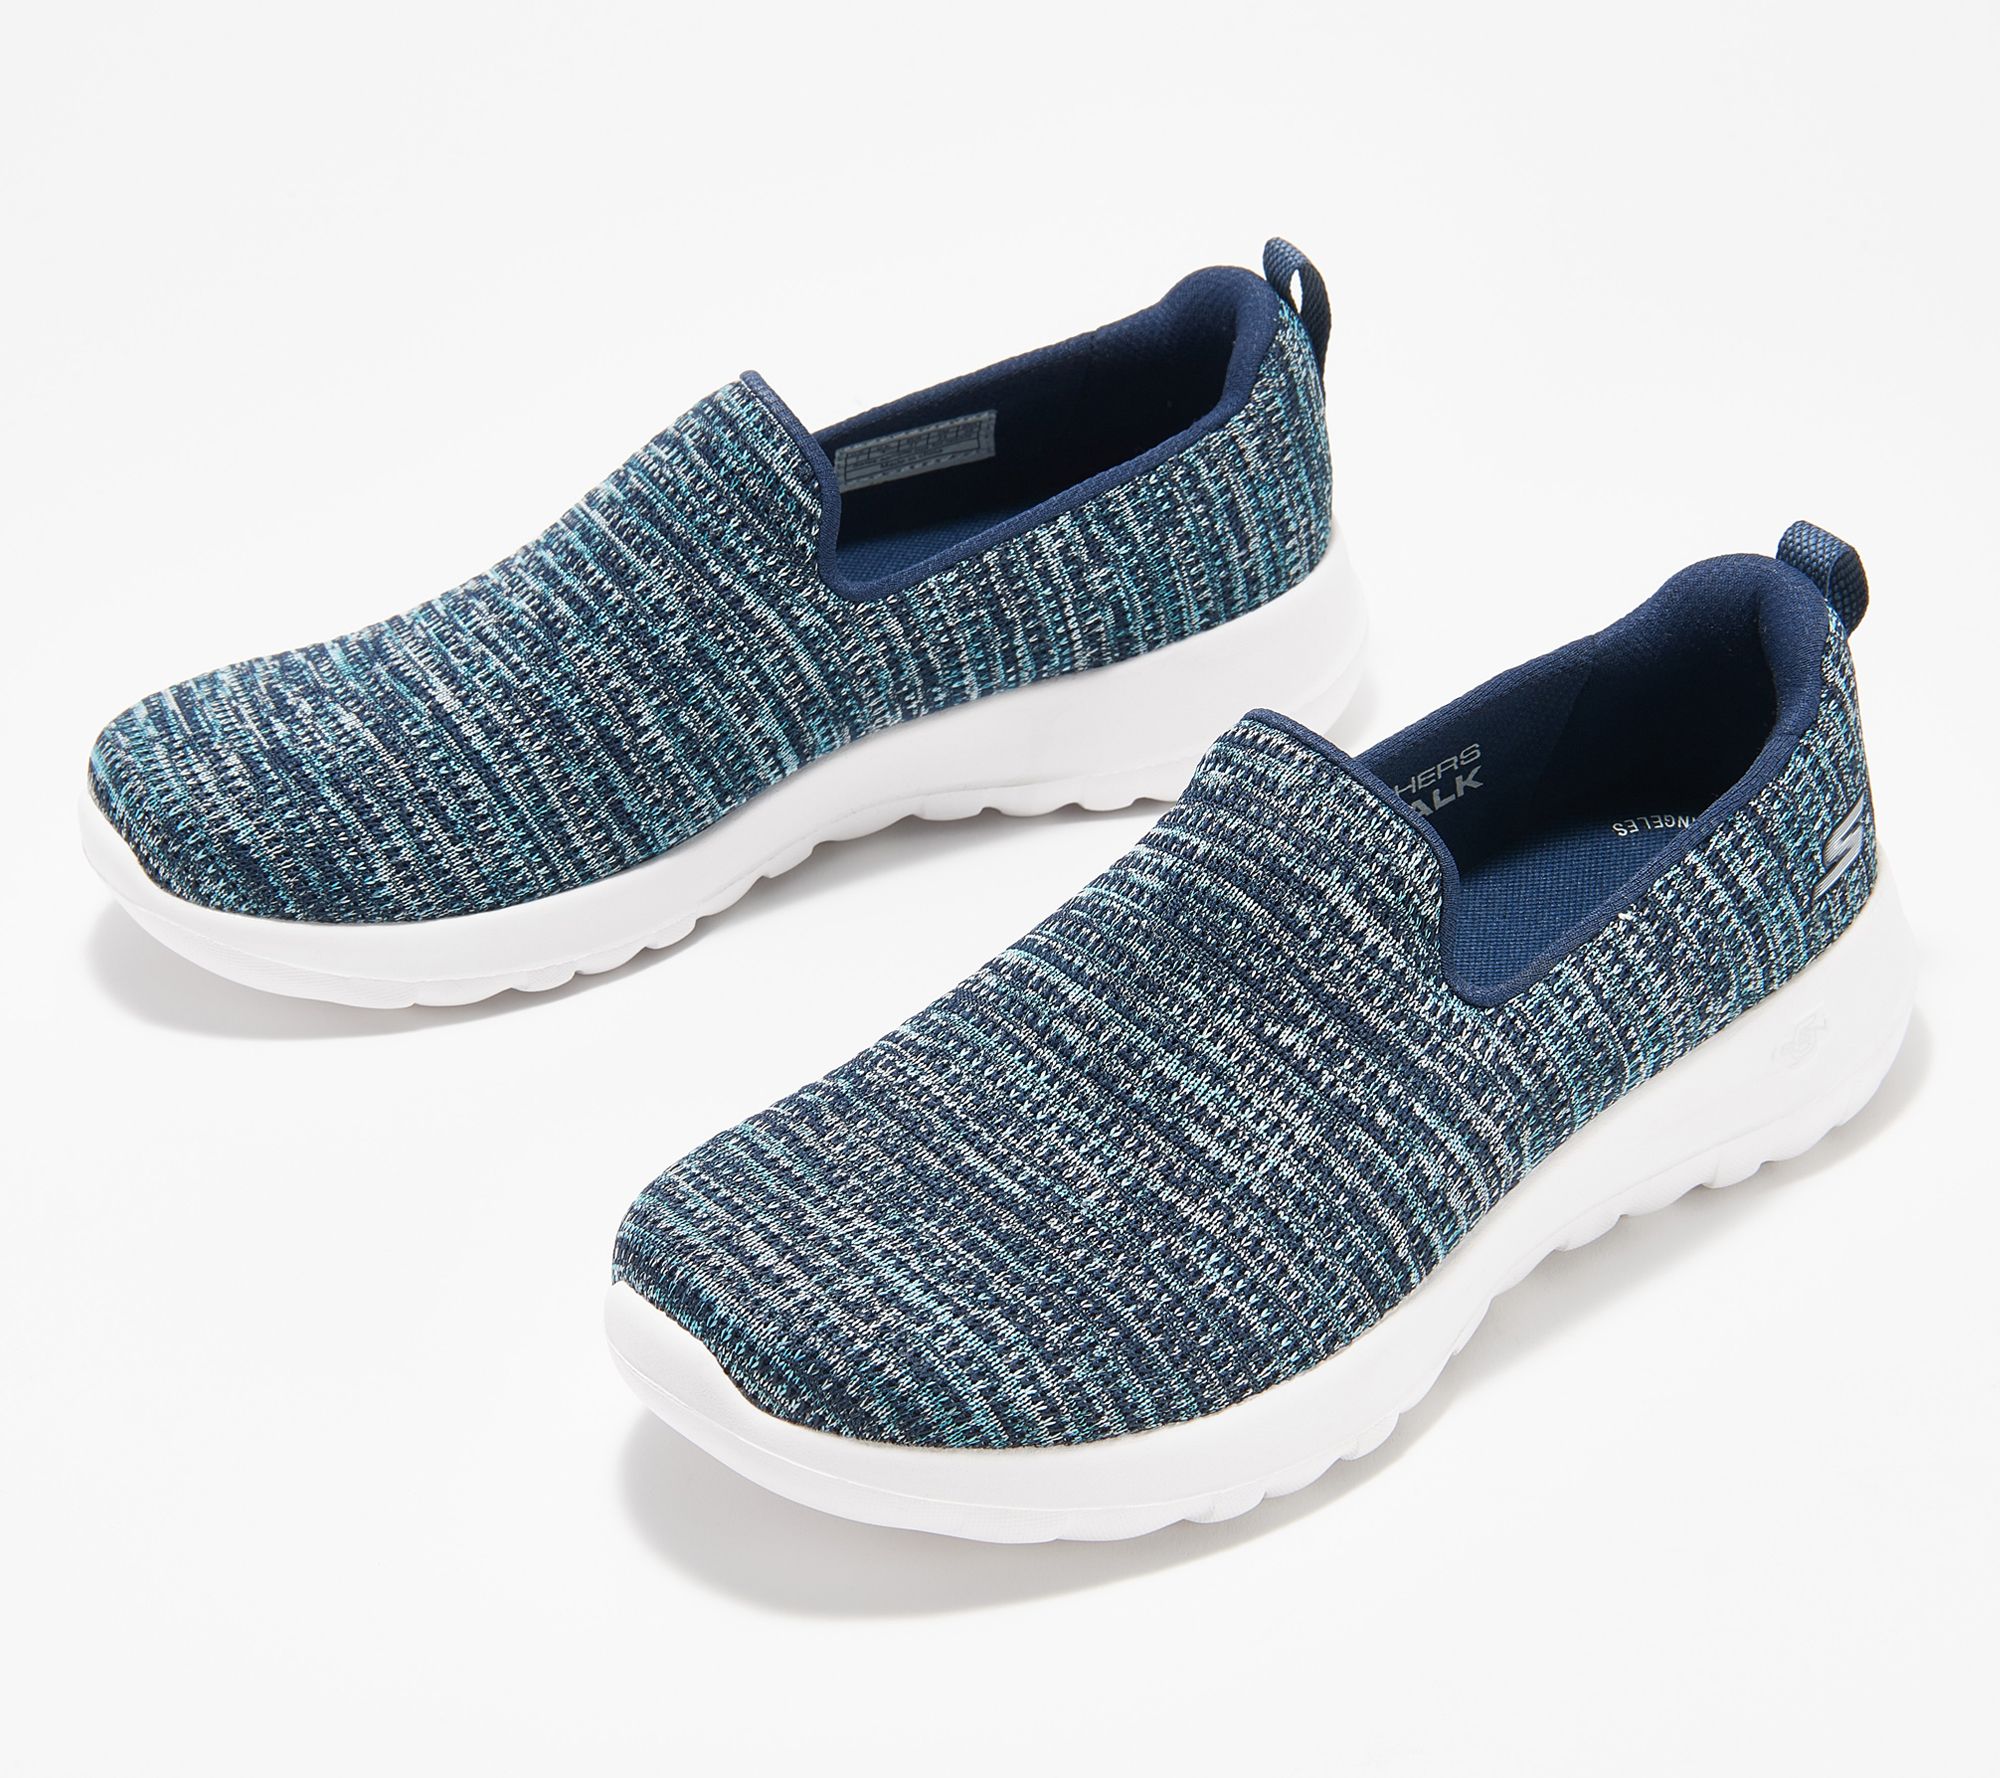 GOwalk Washable Two-Toned Knit Slip-Ons-Everly - QVC.com